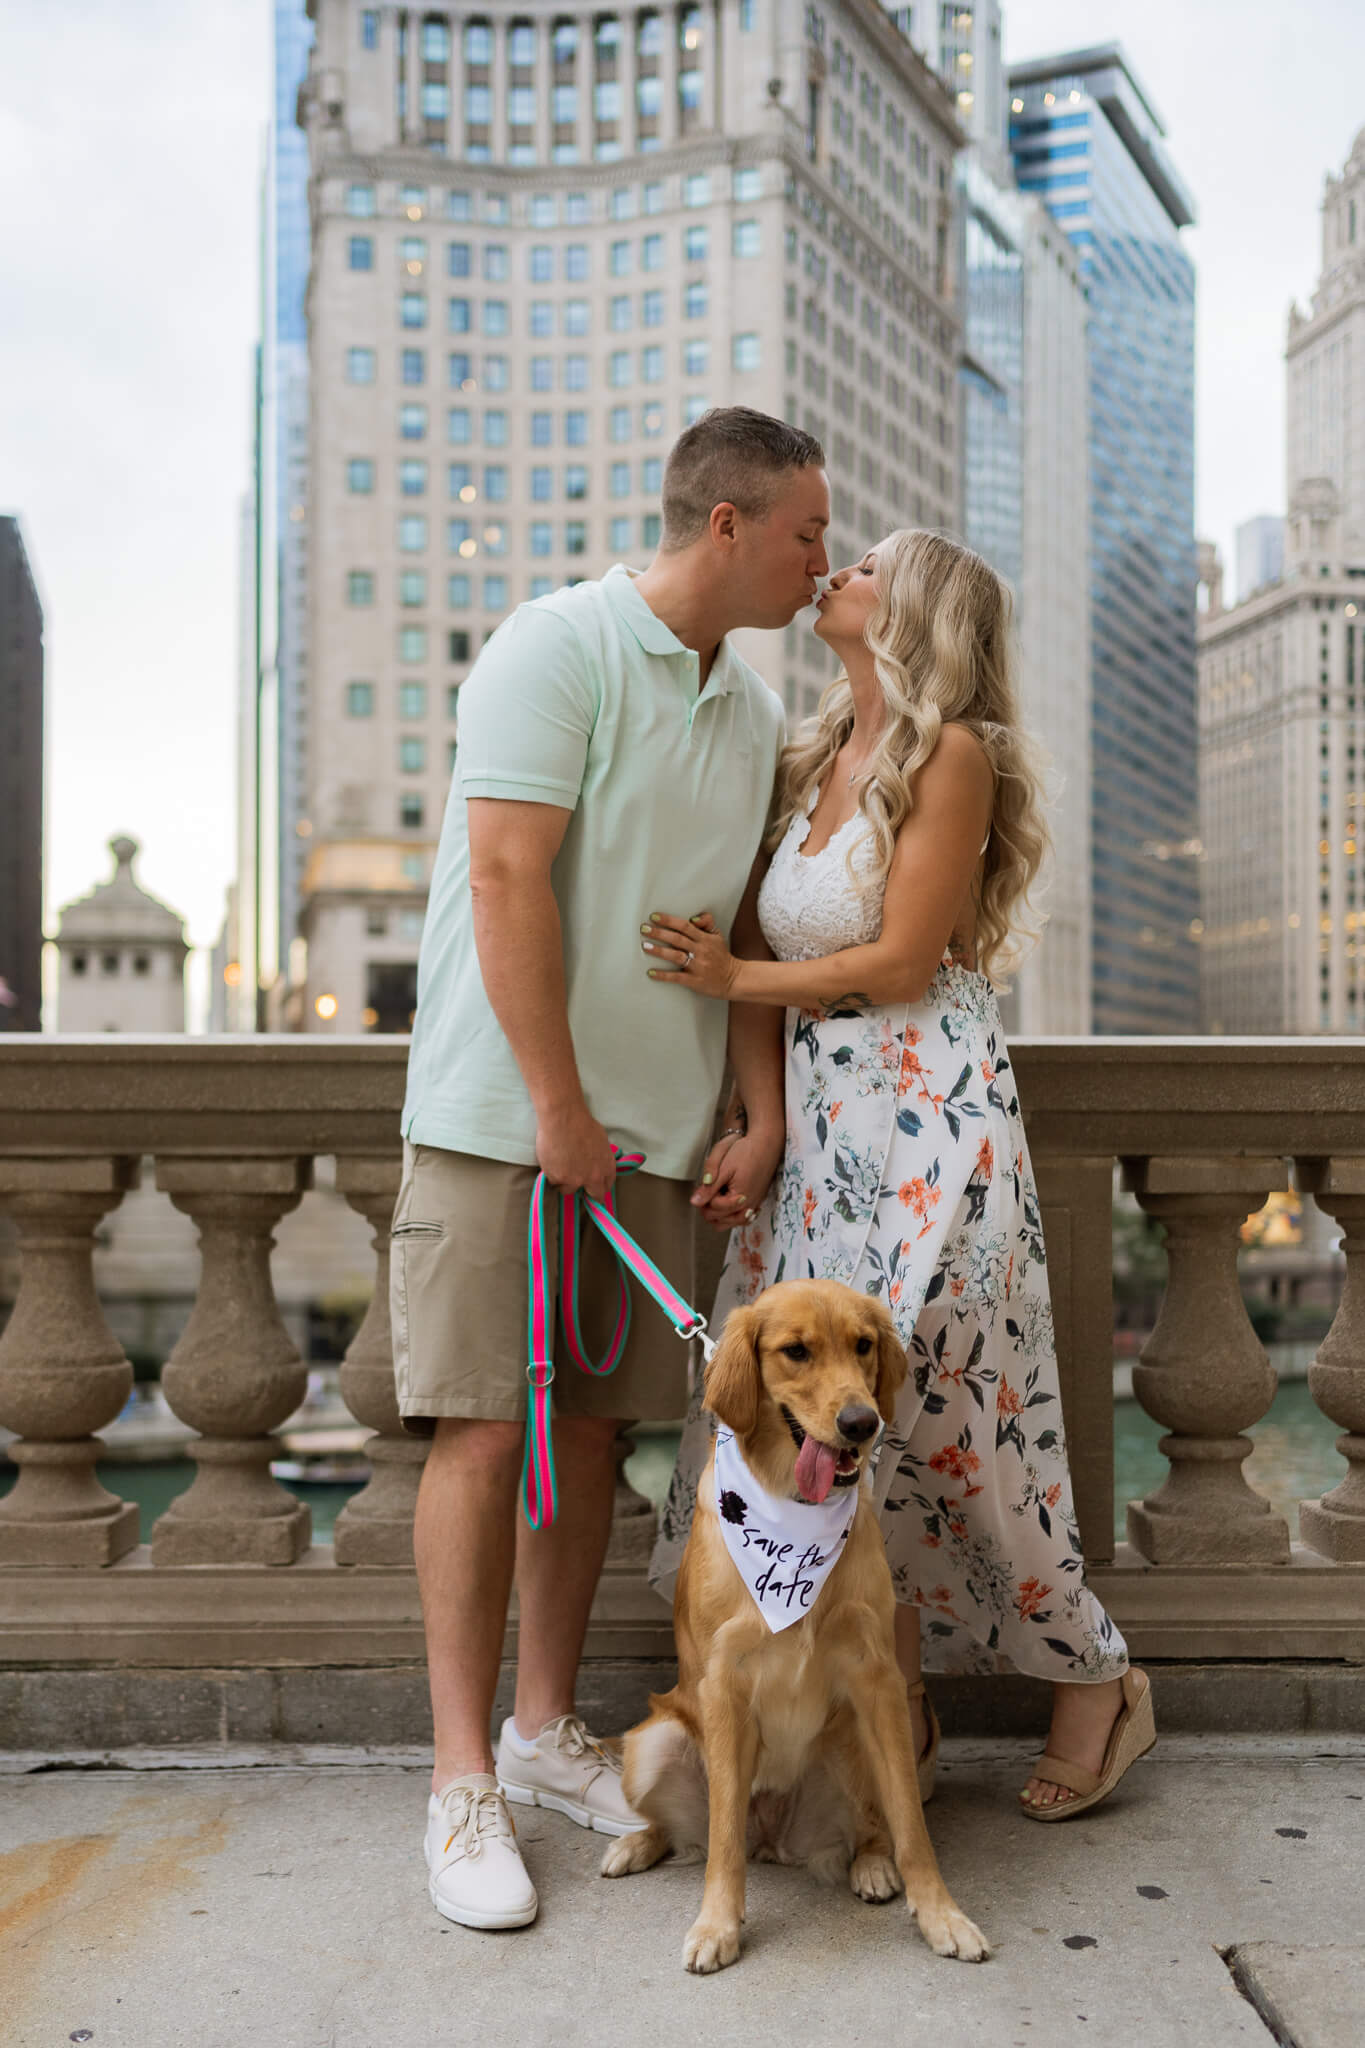 A heterosexual couple leans in for a kiss overlooking iconic downtown Chicago